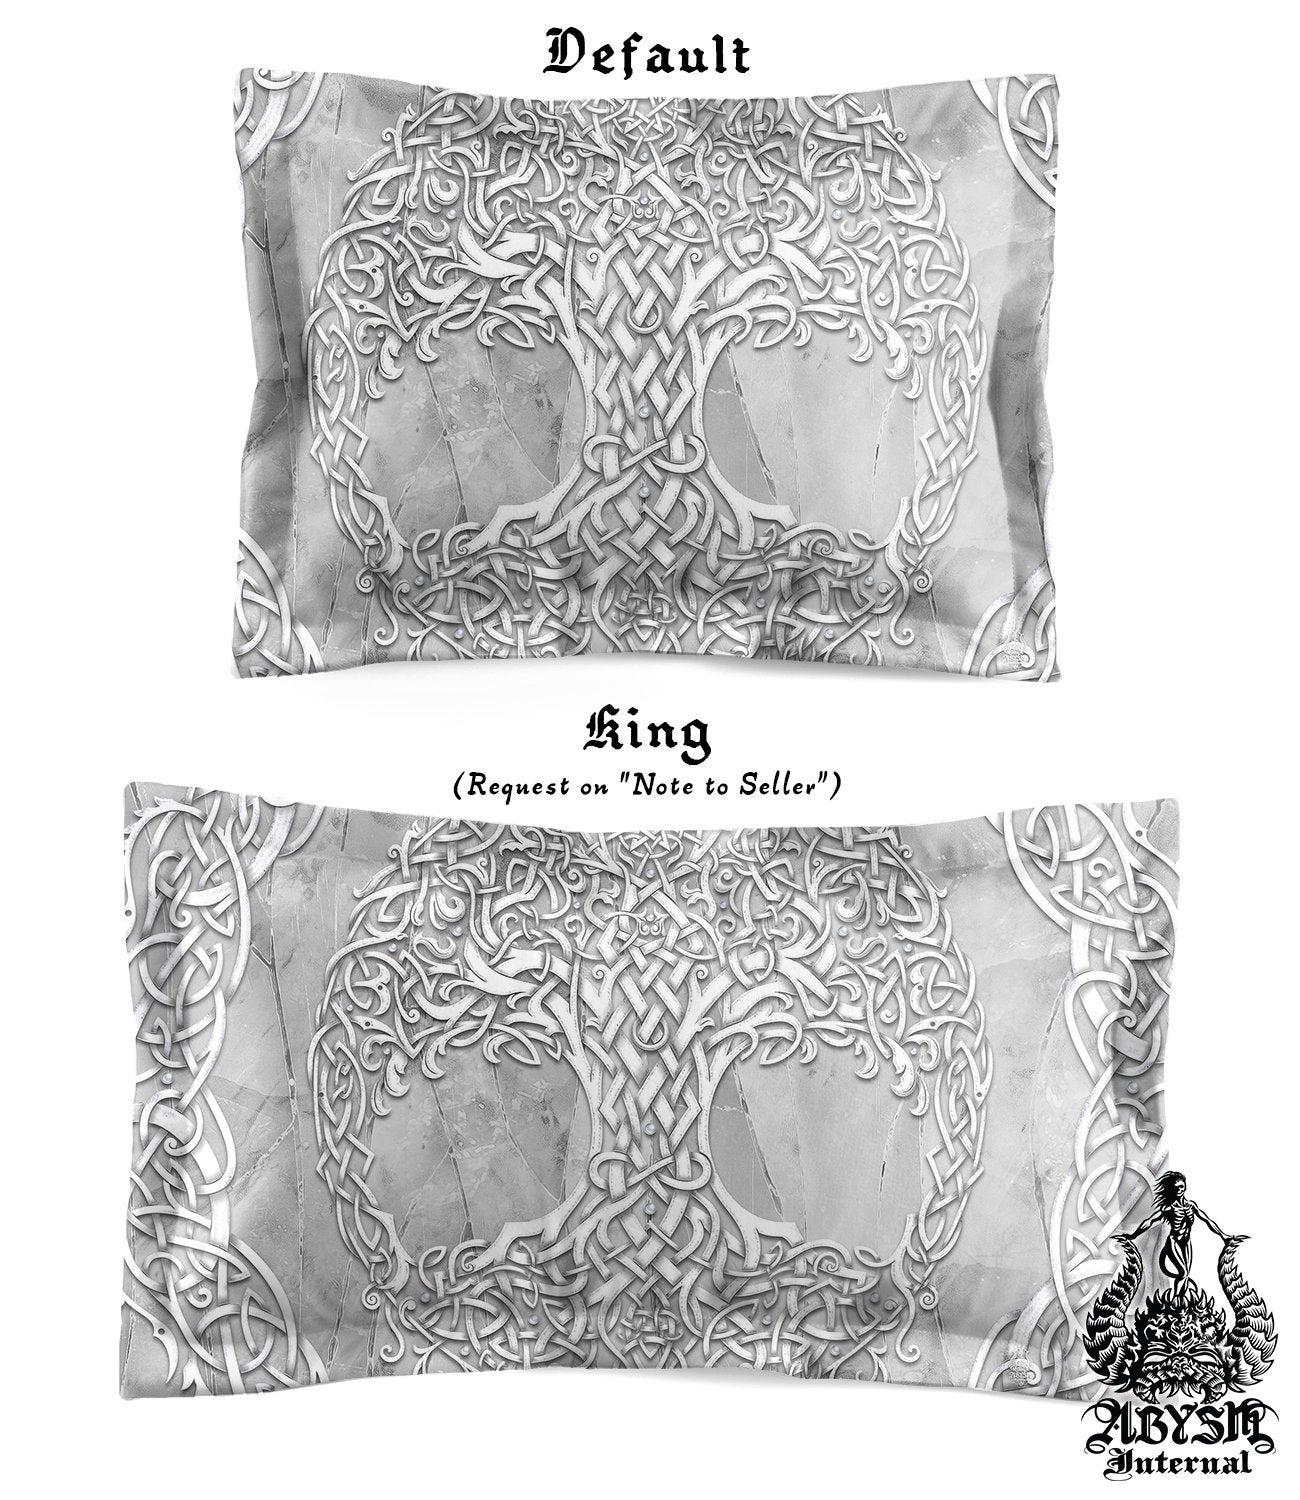 Celtic Bedding Set, Comforter and Duvet, Indie Bed Cover, Wiccan Bedroom Decor, King, Queen and Twin Size - Celtic, Tree of Life, Stone - Abysm Internal